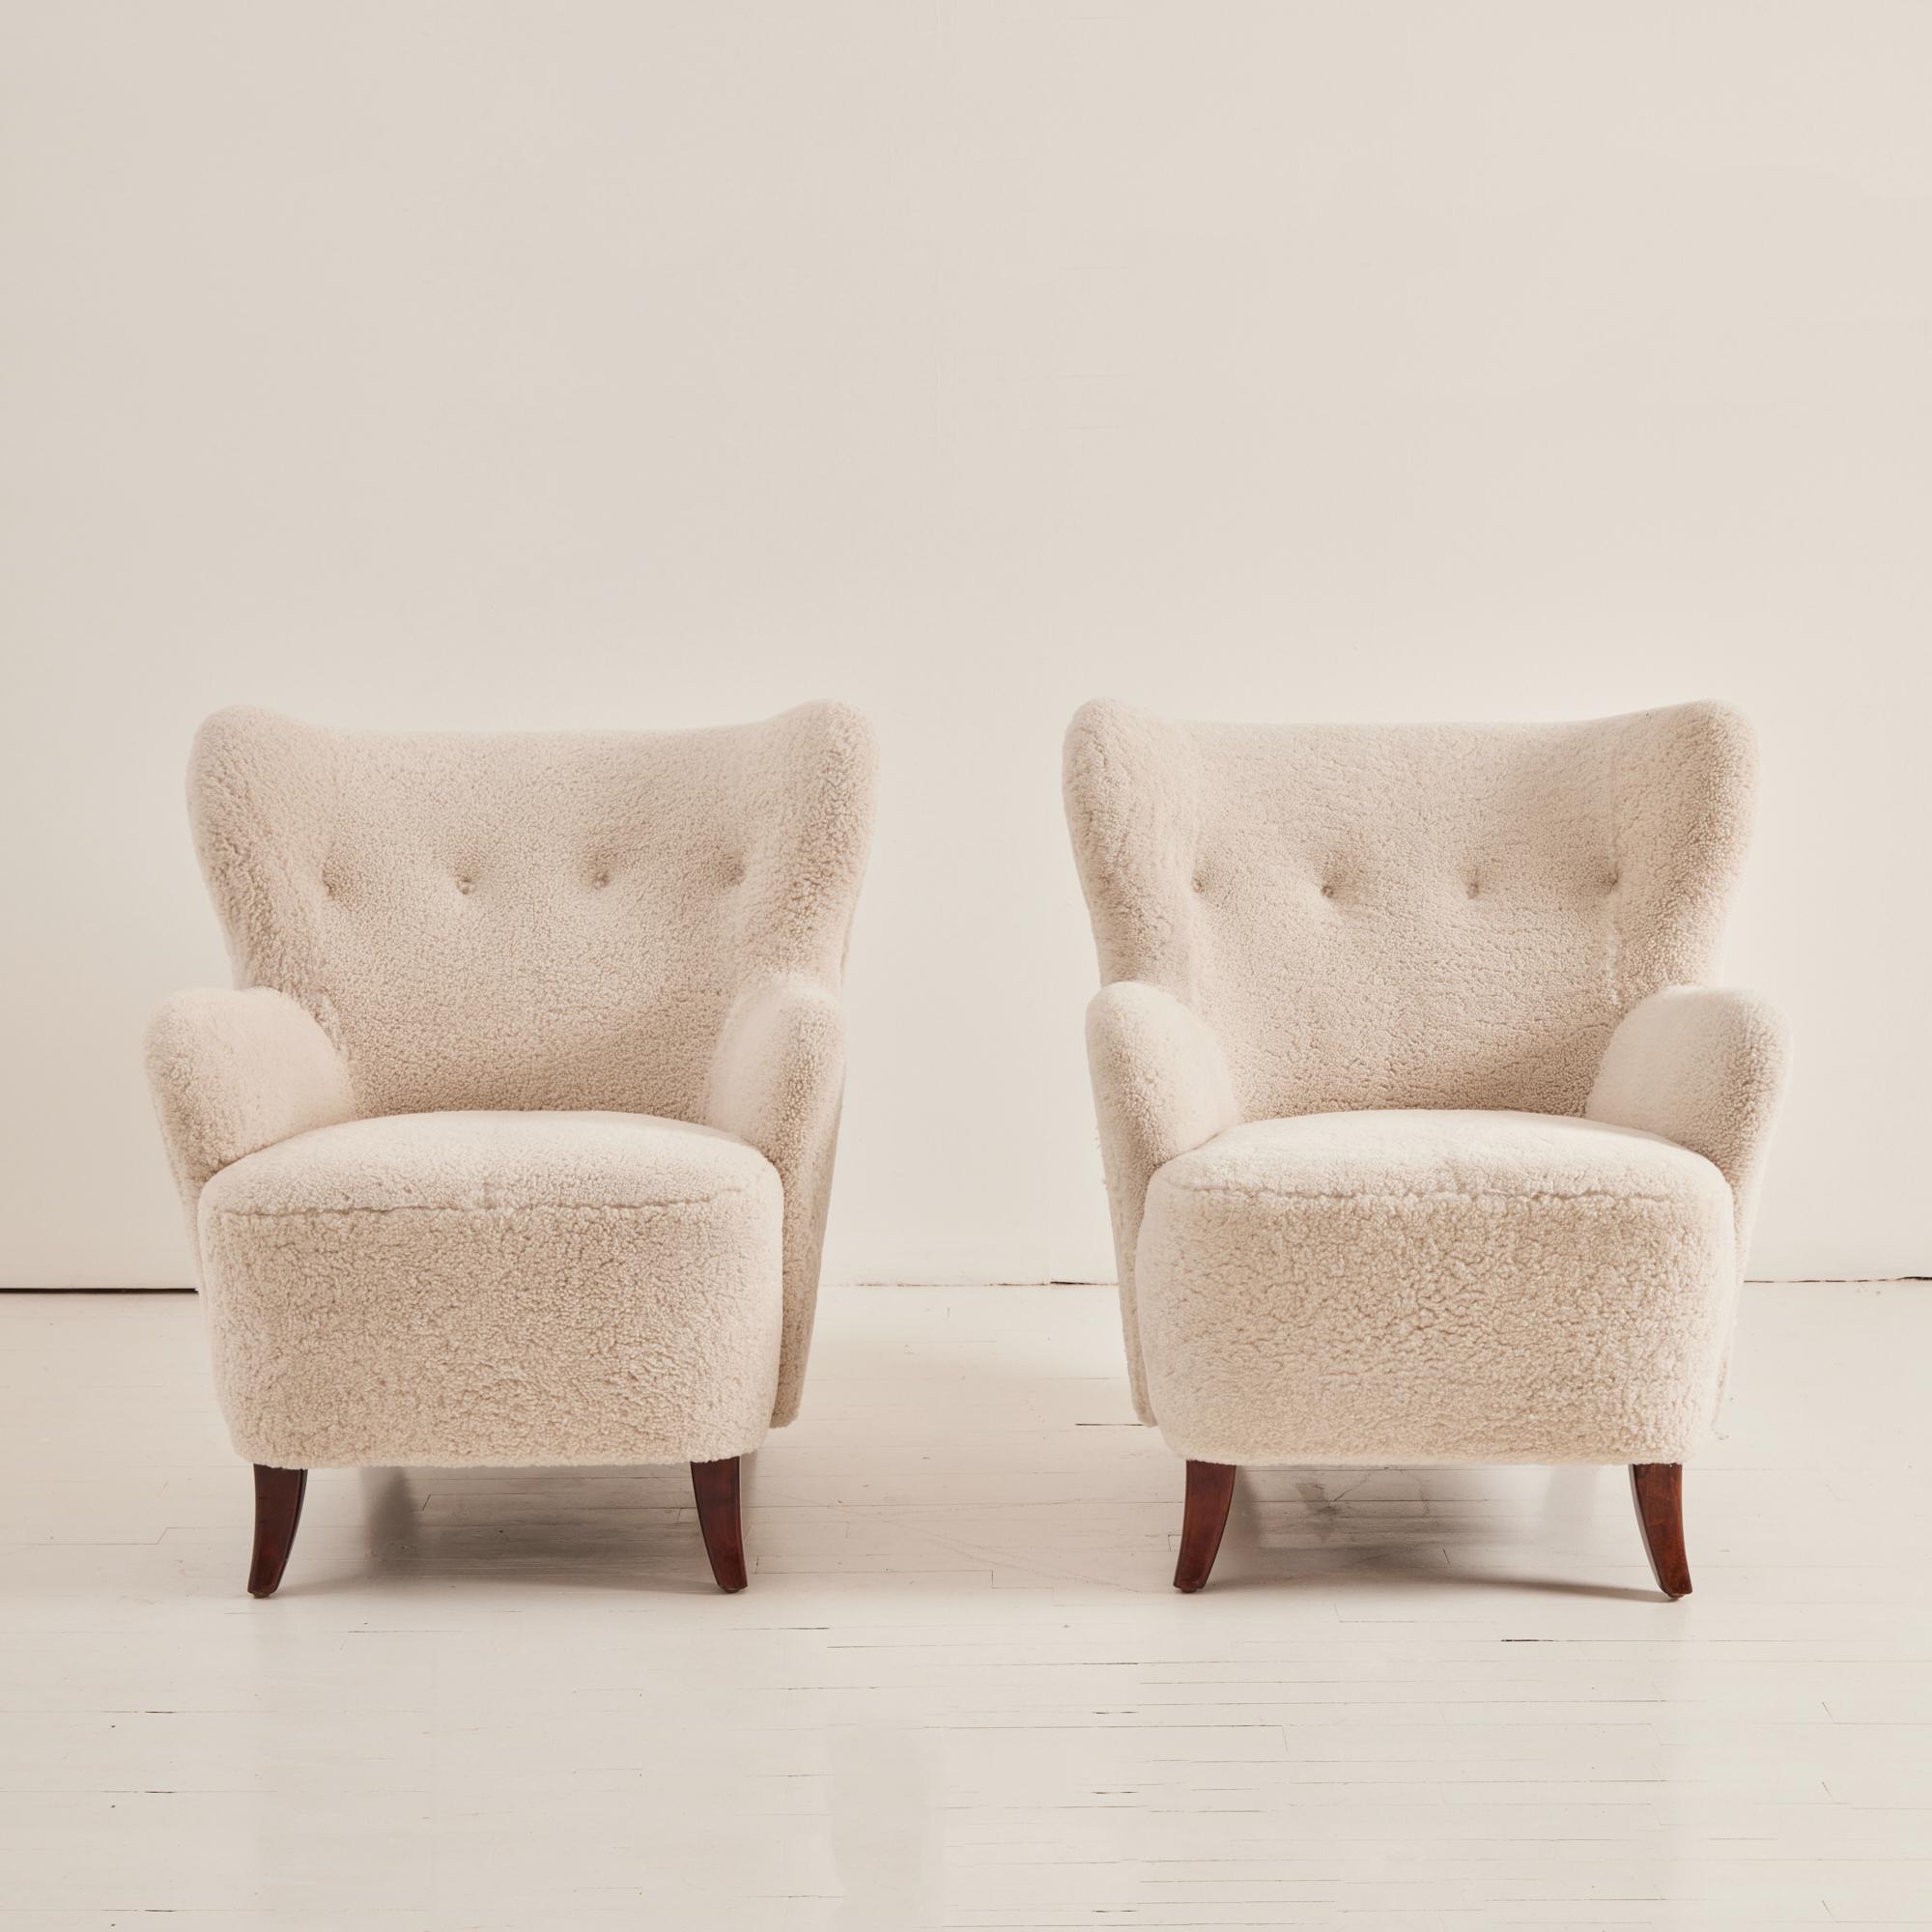 Newly upholstered Swedish Armchairs in a classic and timeless shape. Sheepskin is a soft, bone colored skin from New Zealand. Comfortable and inviting with tufted button on back rest and beech stained legs.